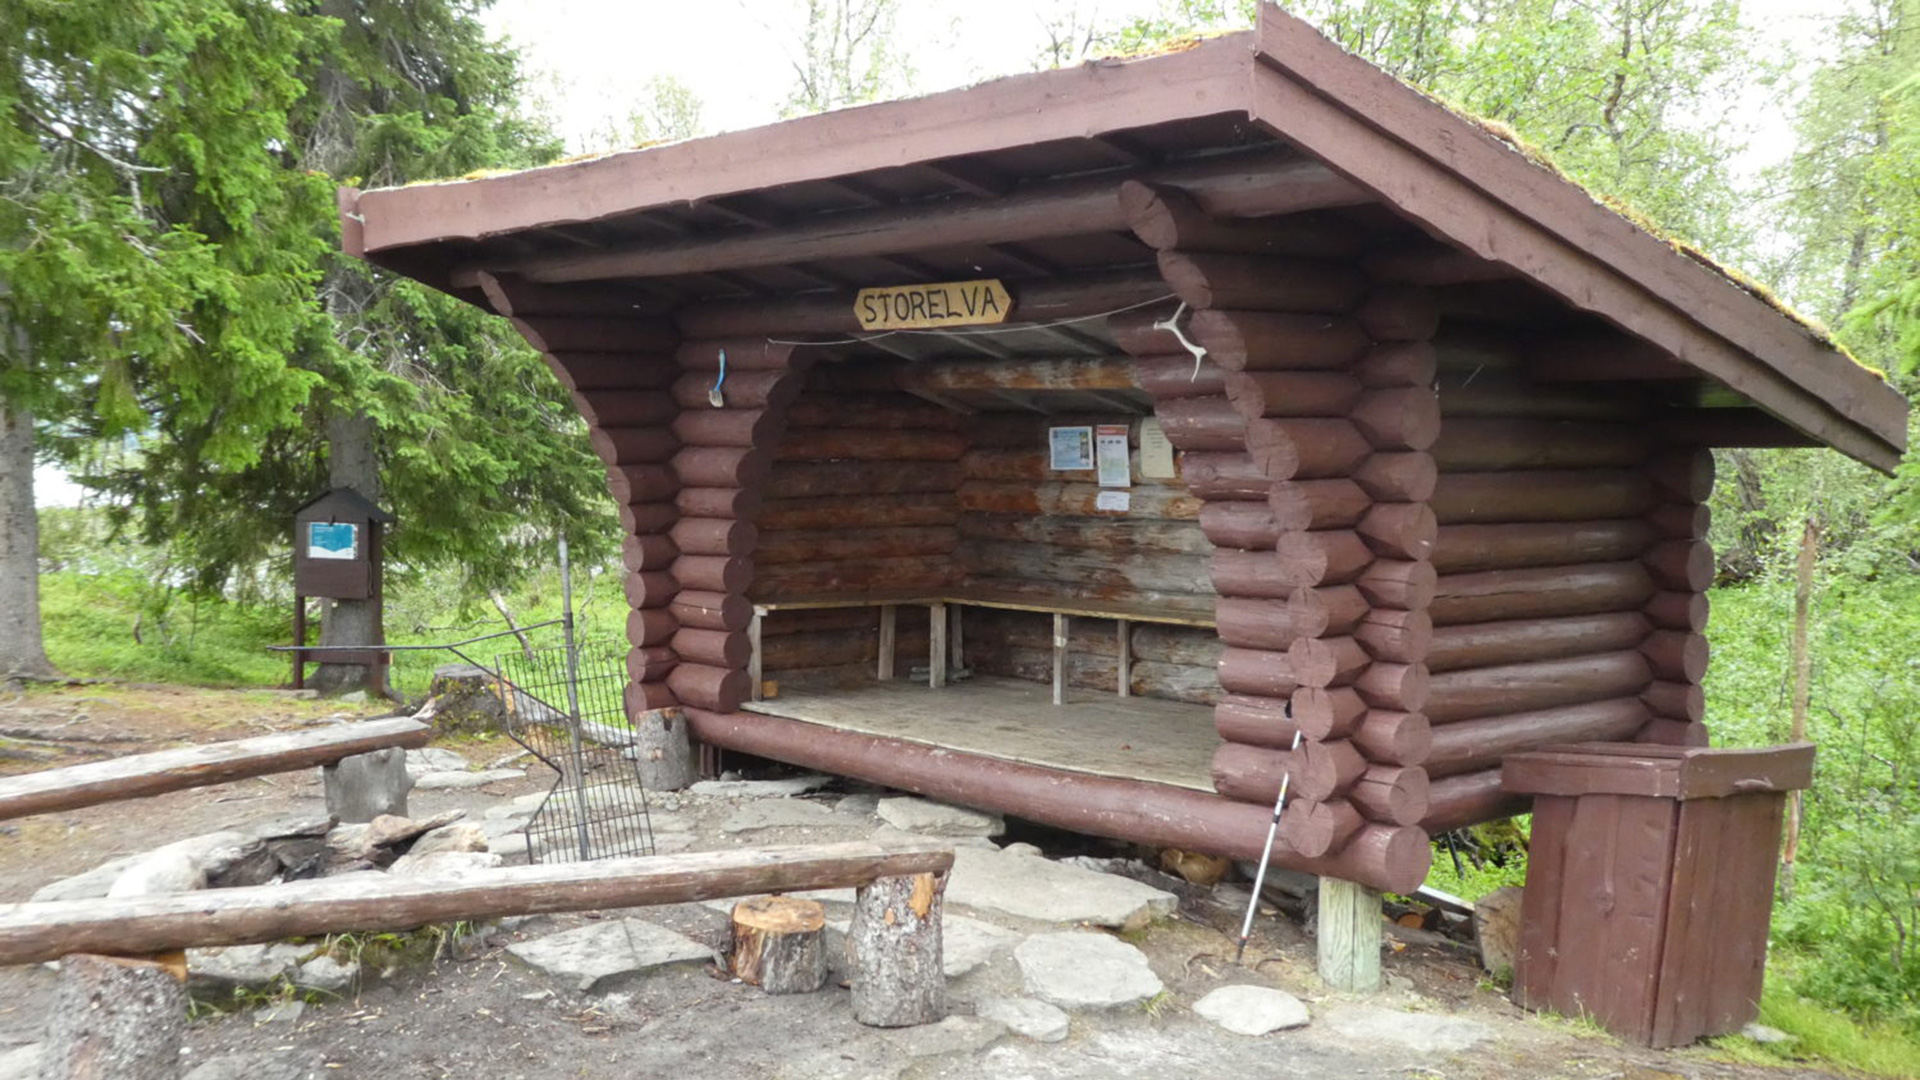 The rustic shelter at the Storelva